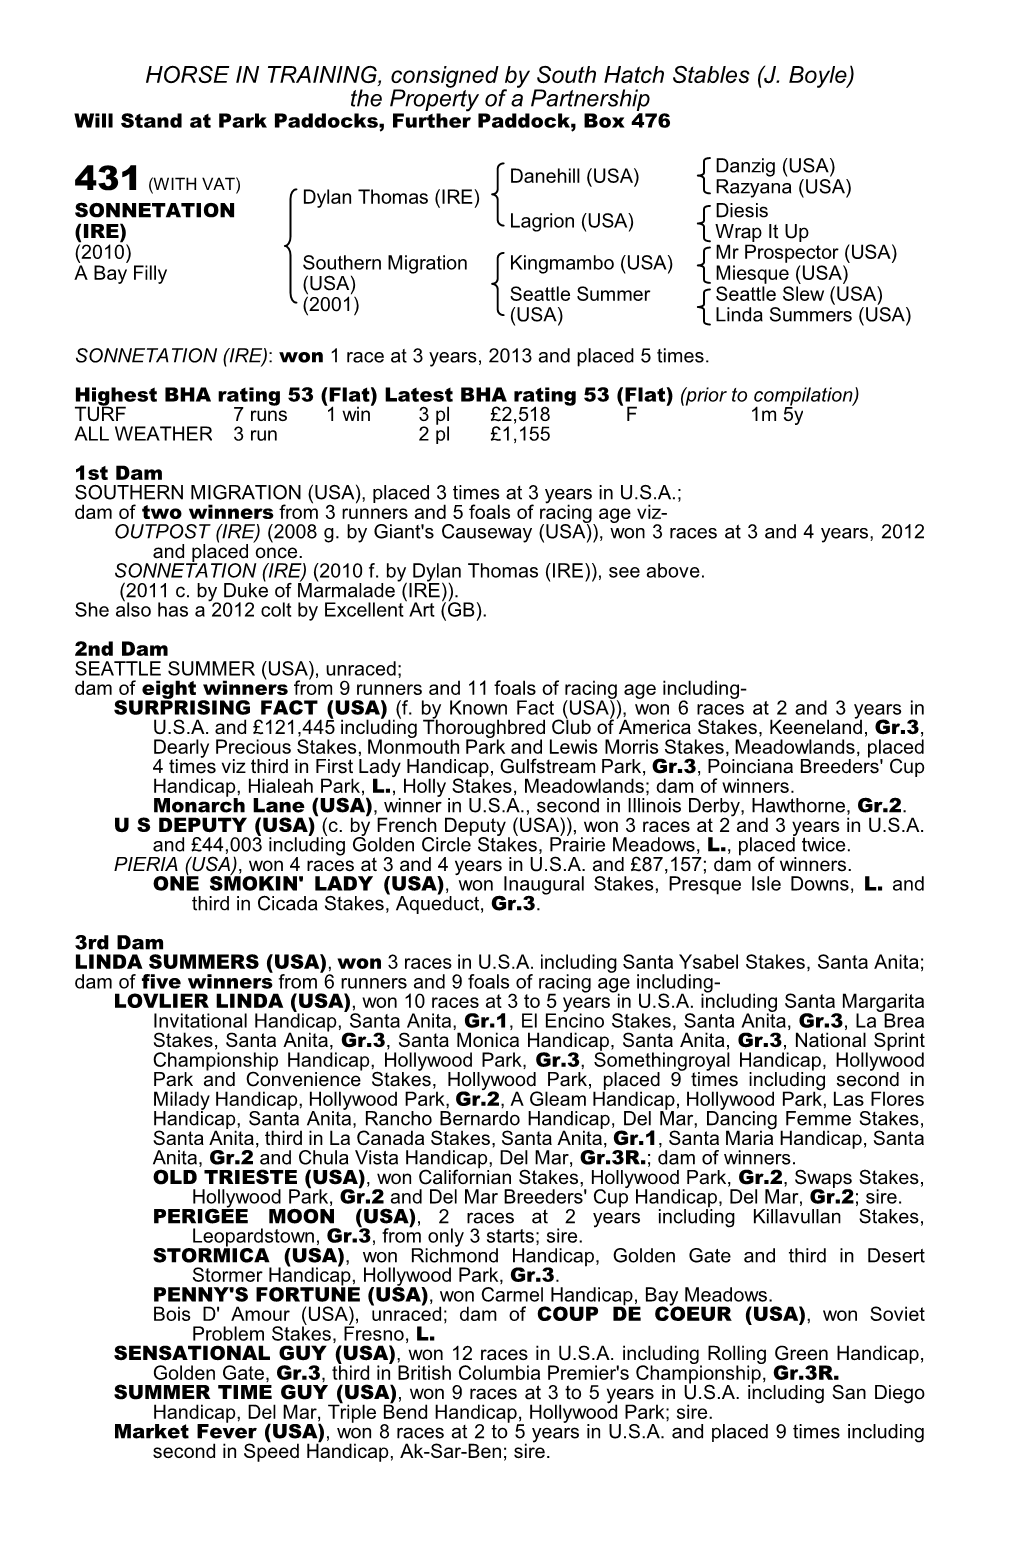 HORSE in TRAINING, Consigned by South Hatch Stables (J